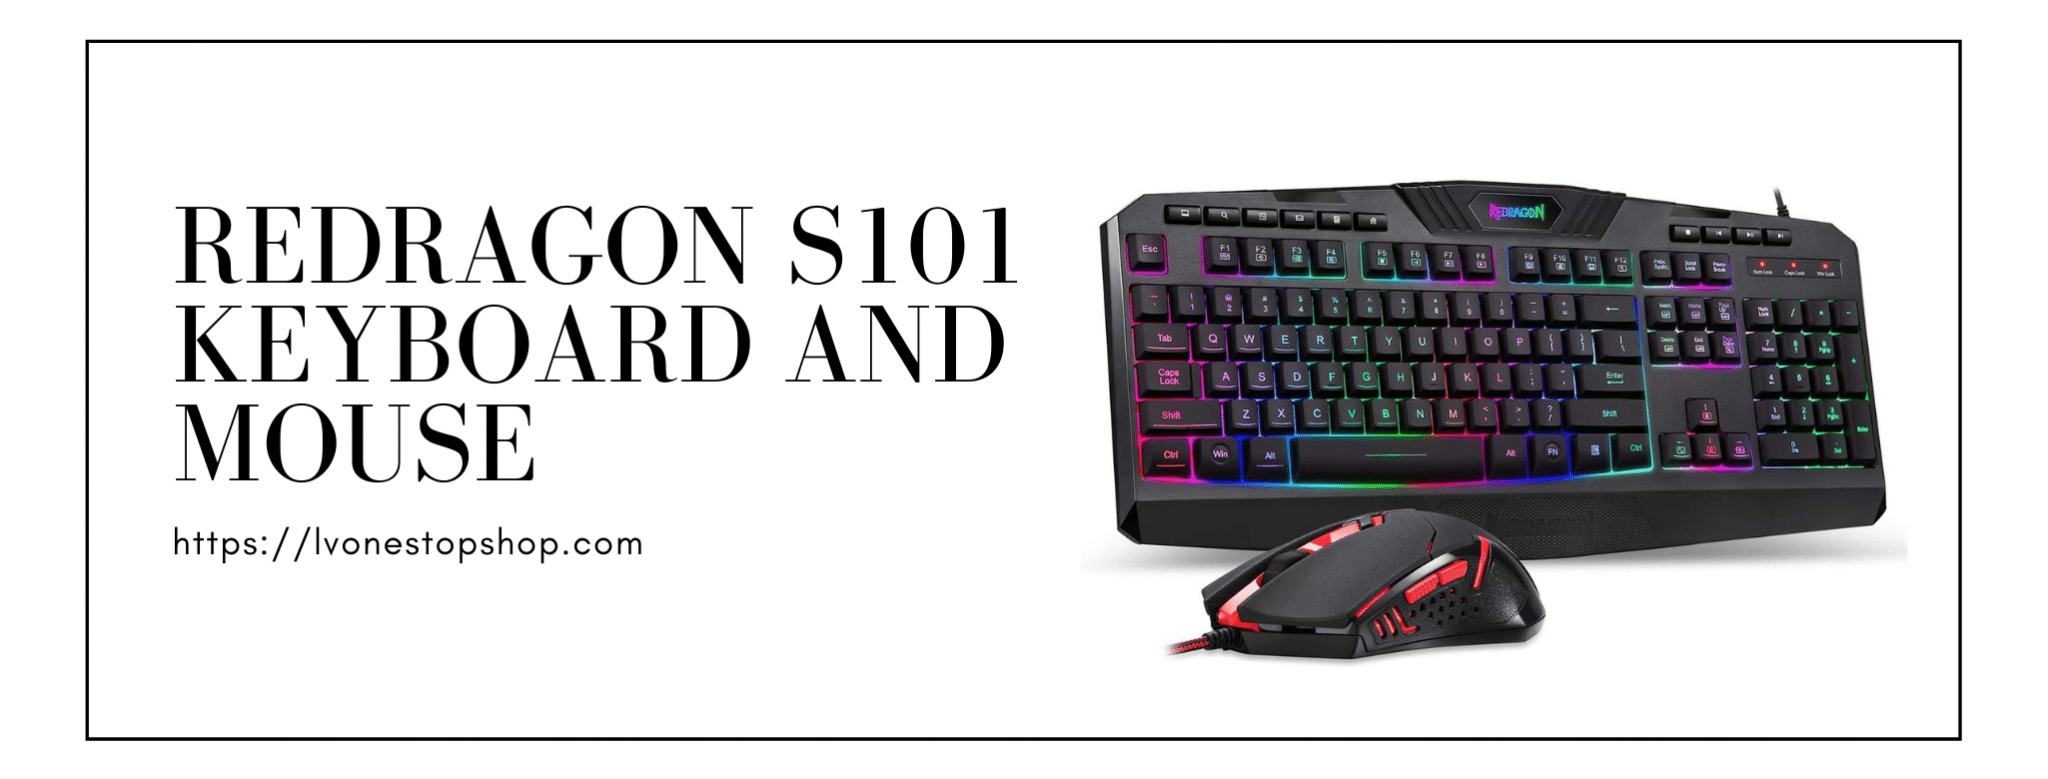 Redragon S101 Keyboard and Mouse